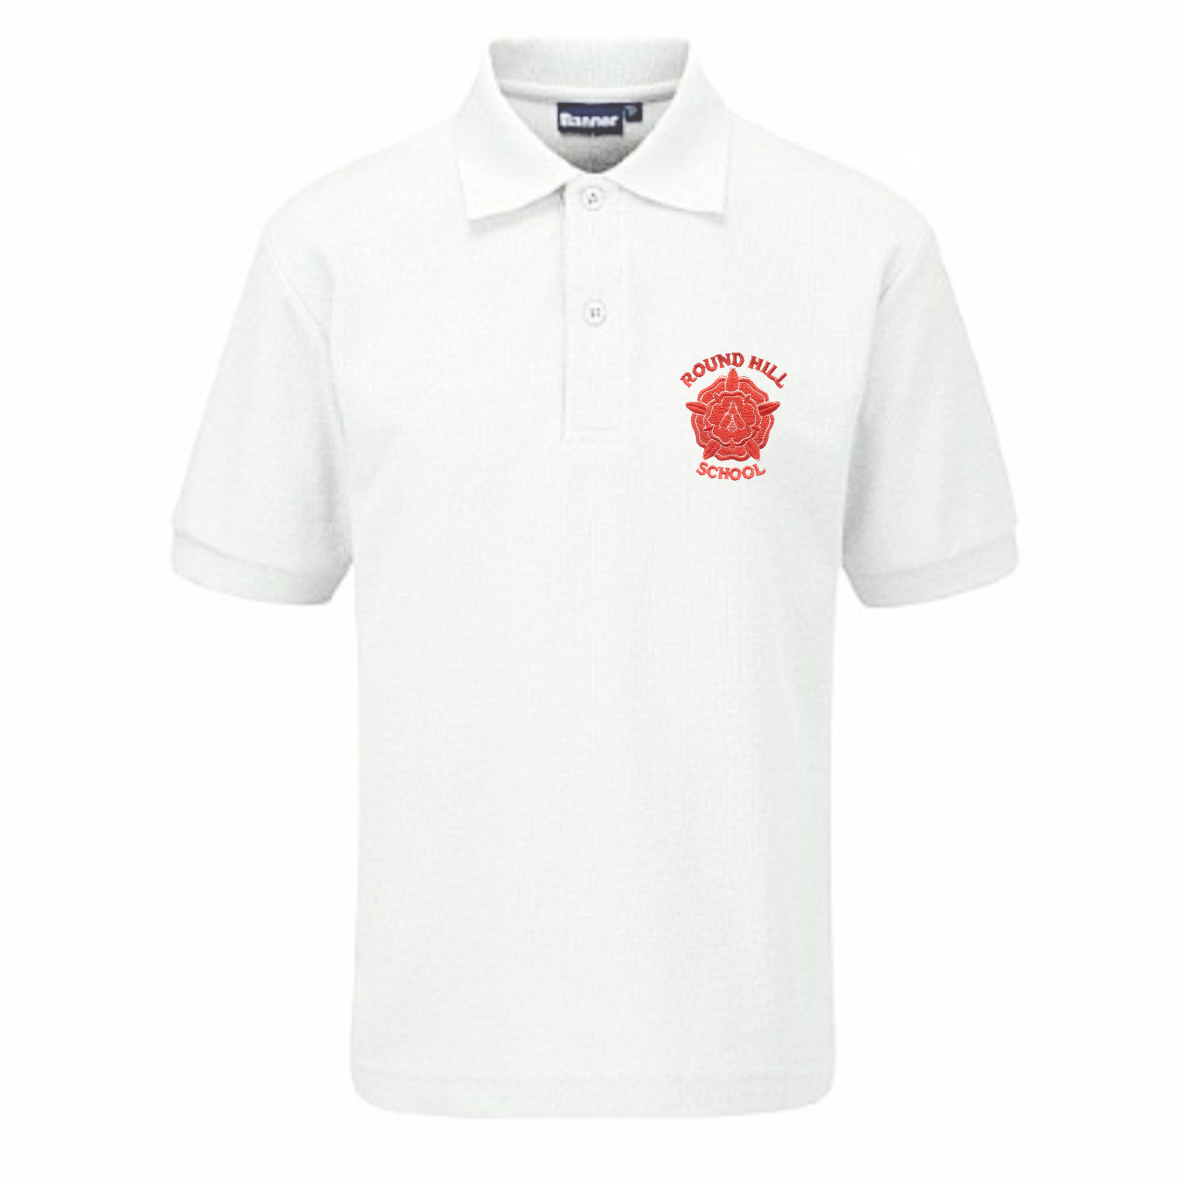 Round Hill Primary School White Polo Shirt w/Red Logo - Schoolwear ...